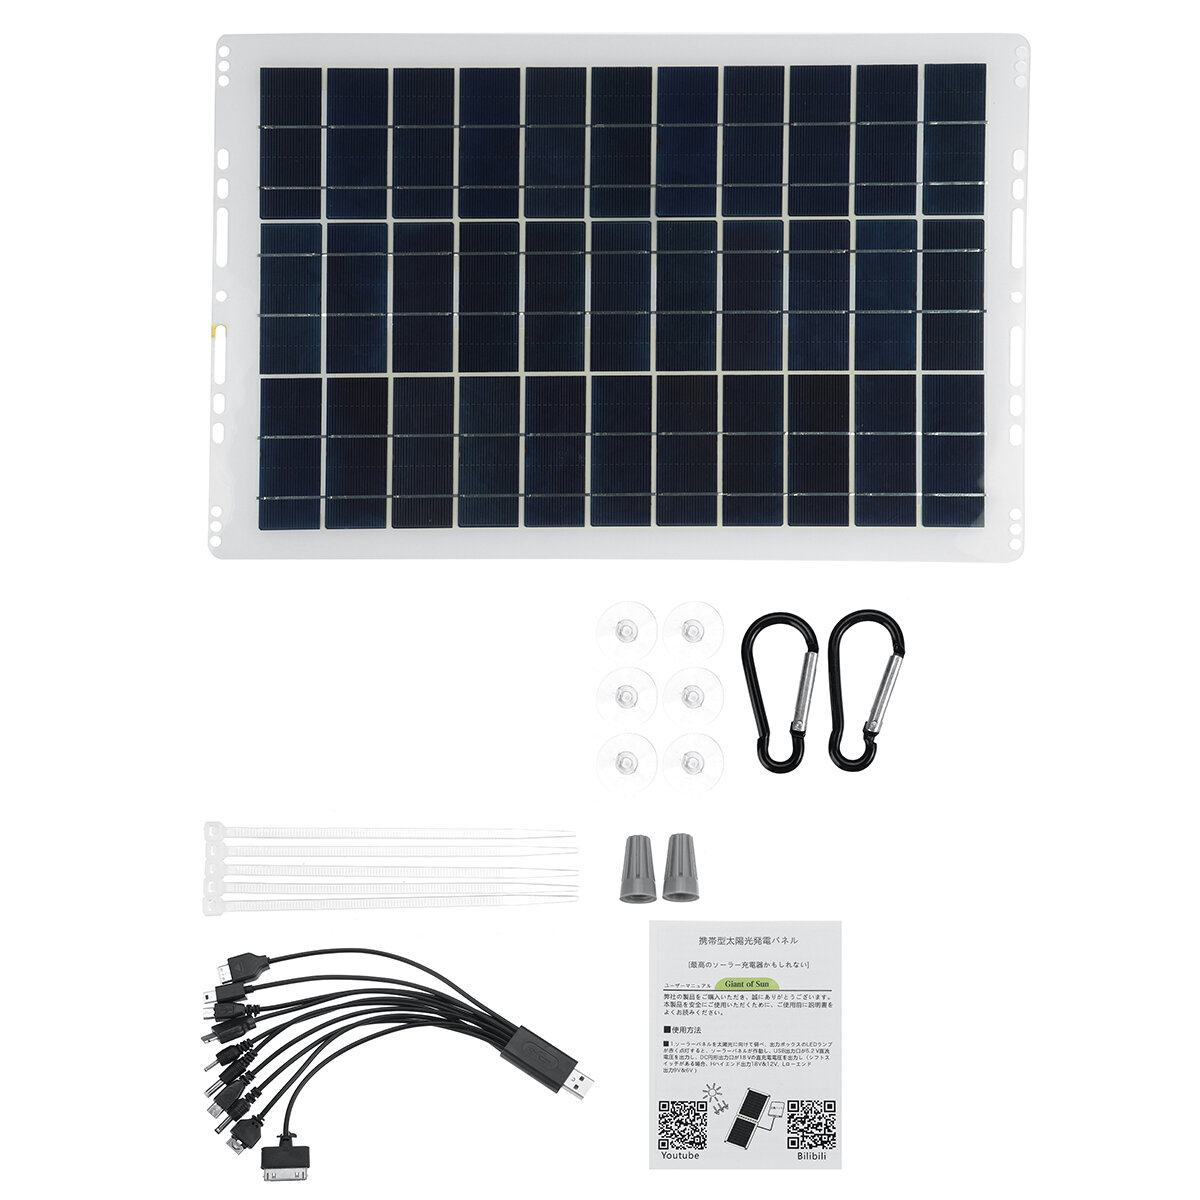 Portable Solar Panel Kit 10A/30A/60A/100A USB Battery Charger for Outdoor Camping Travel Caravan Van Boat